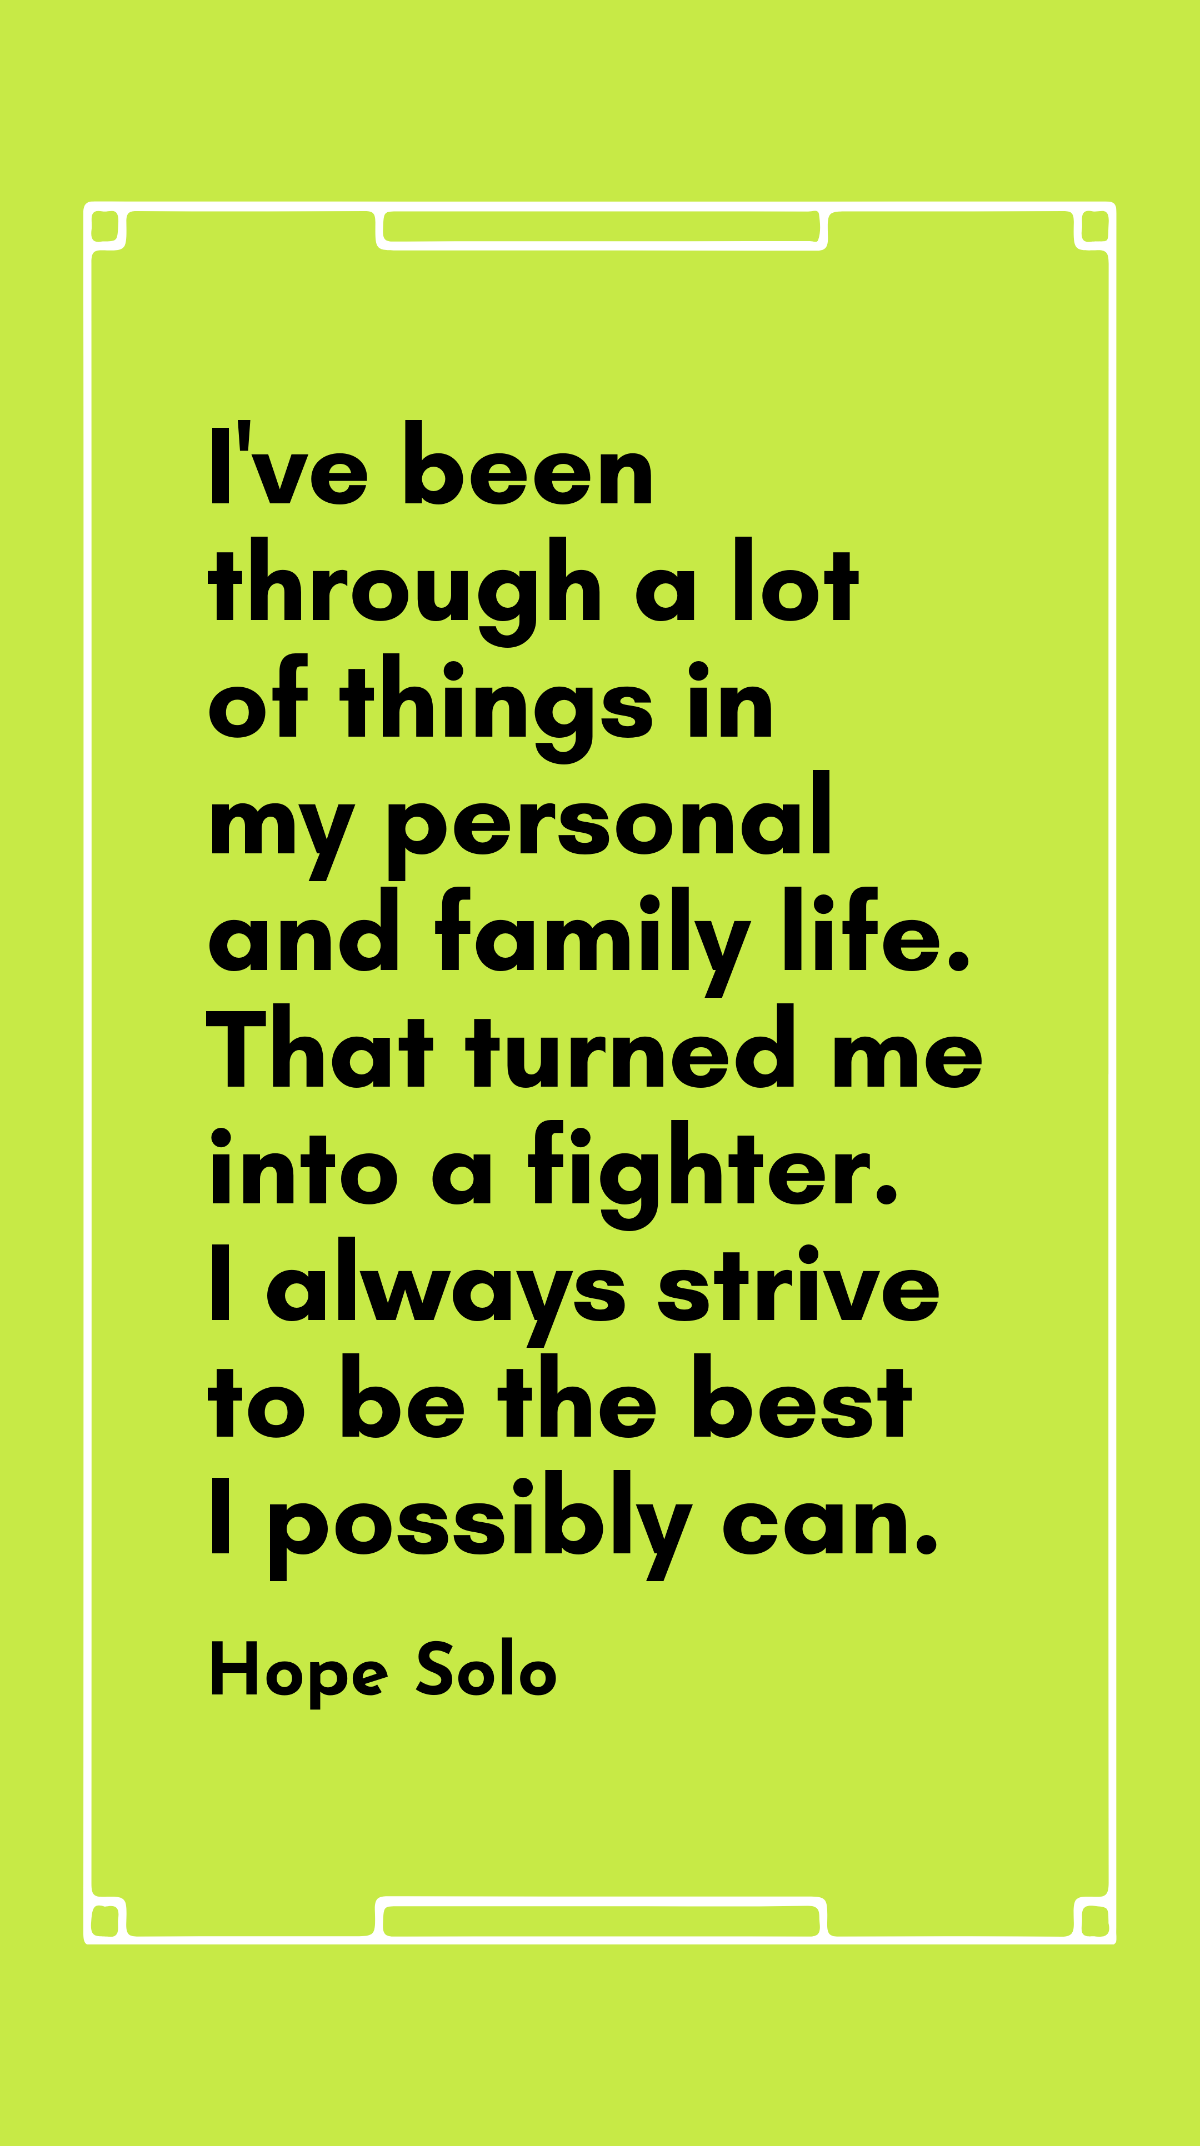 Free Hope Solo - I've been through a lot of things in my personal and family life. That turned me into a fighter. I always strive to be the best I possibly can. Template